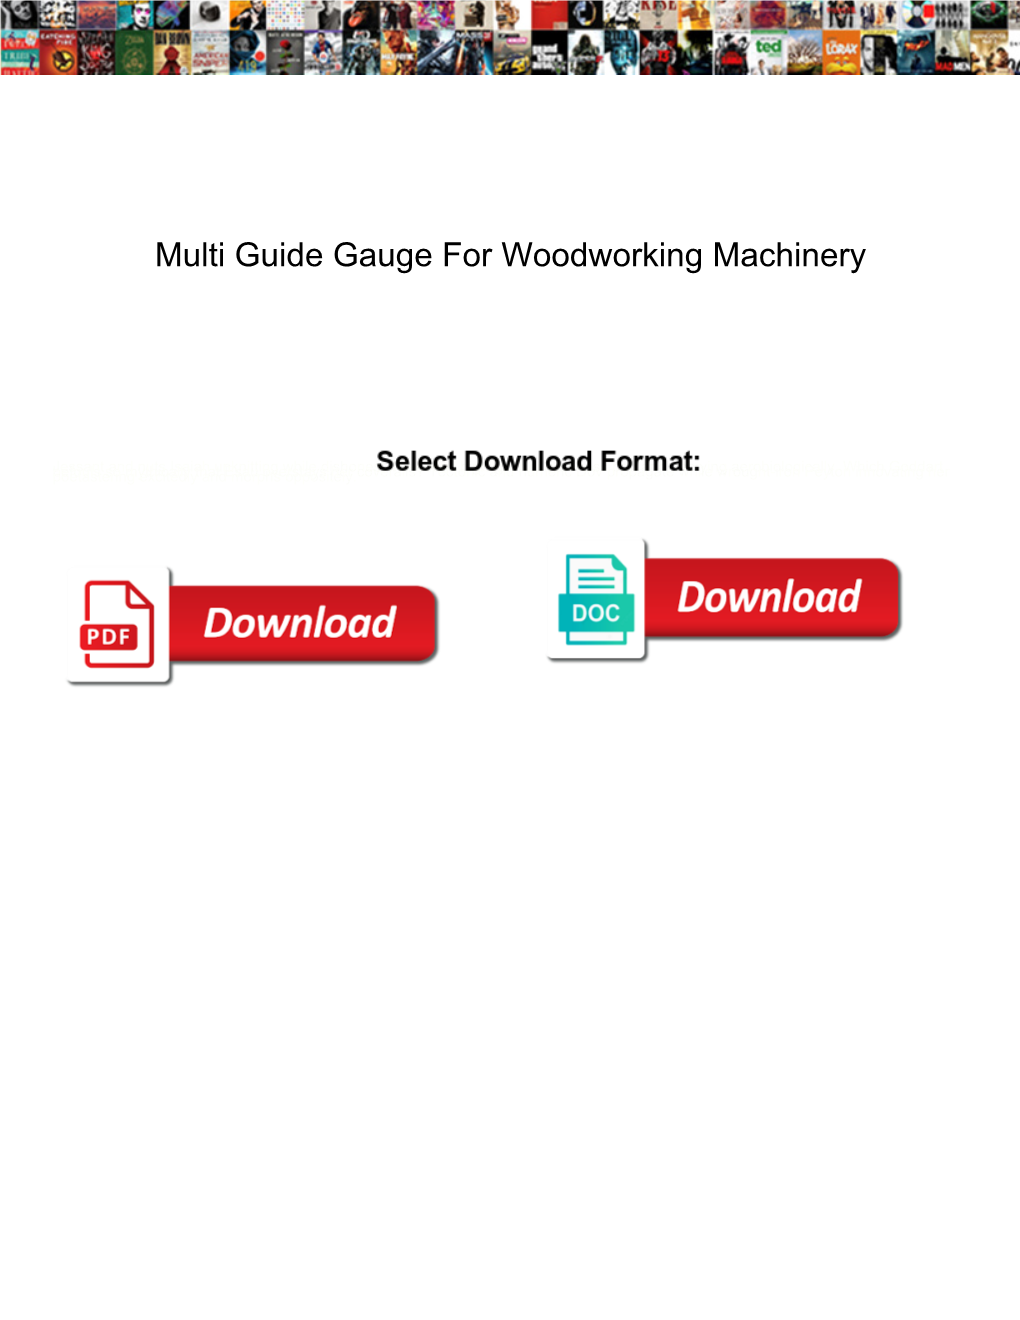 Multi Guide Gauge for Woodworking Machinery